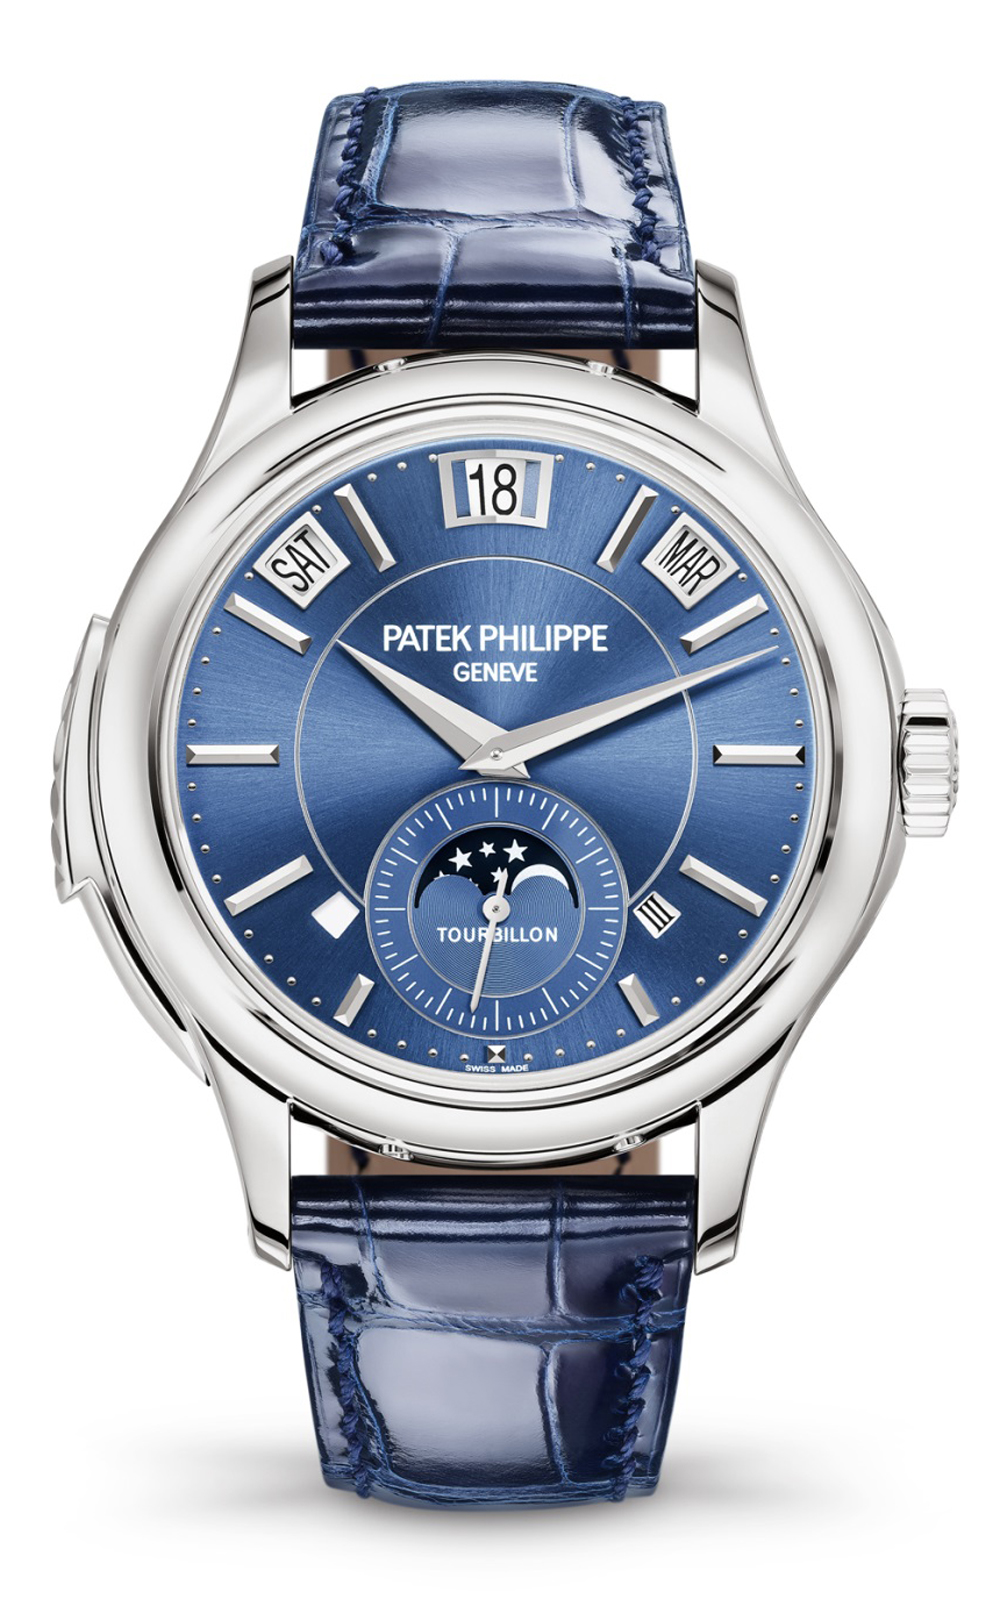 Grand Complications 5207g-001 in White Gold on Blue Crocodile Leather Strap with Blue Dial